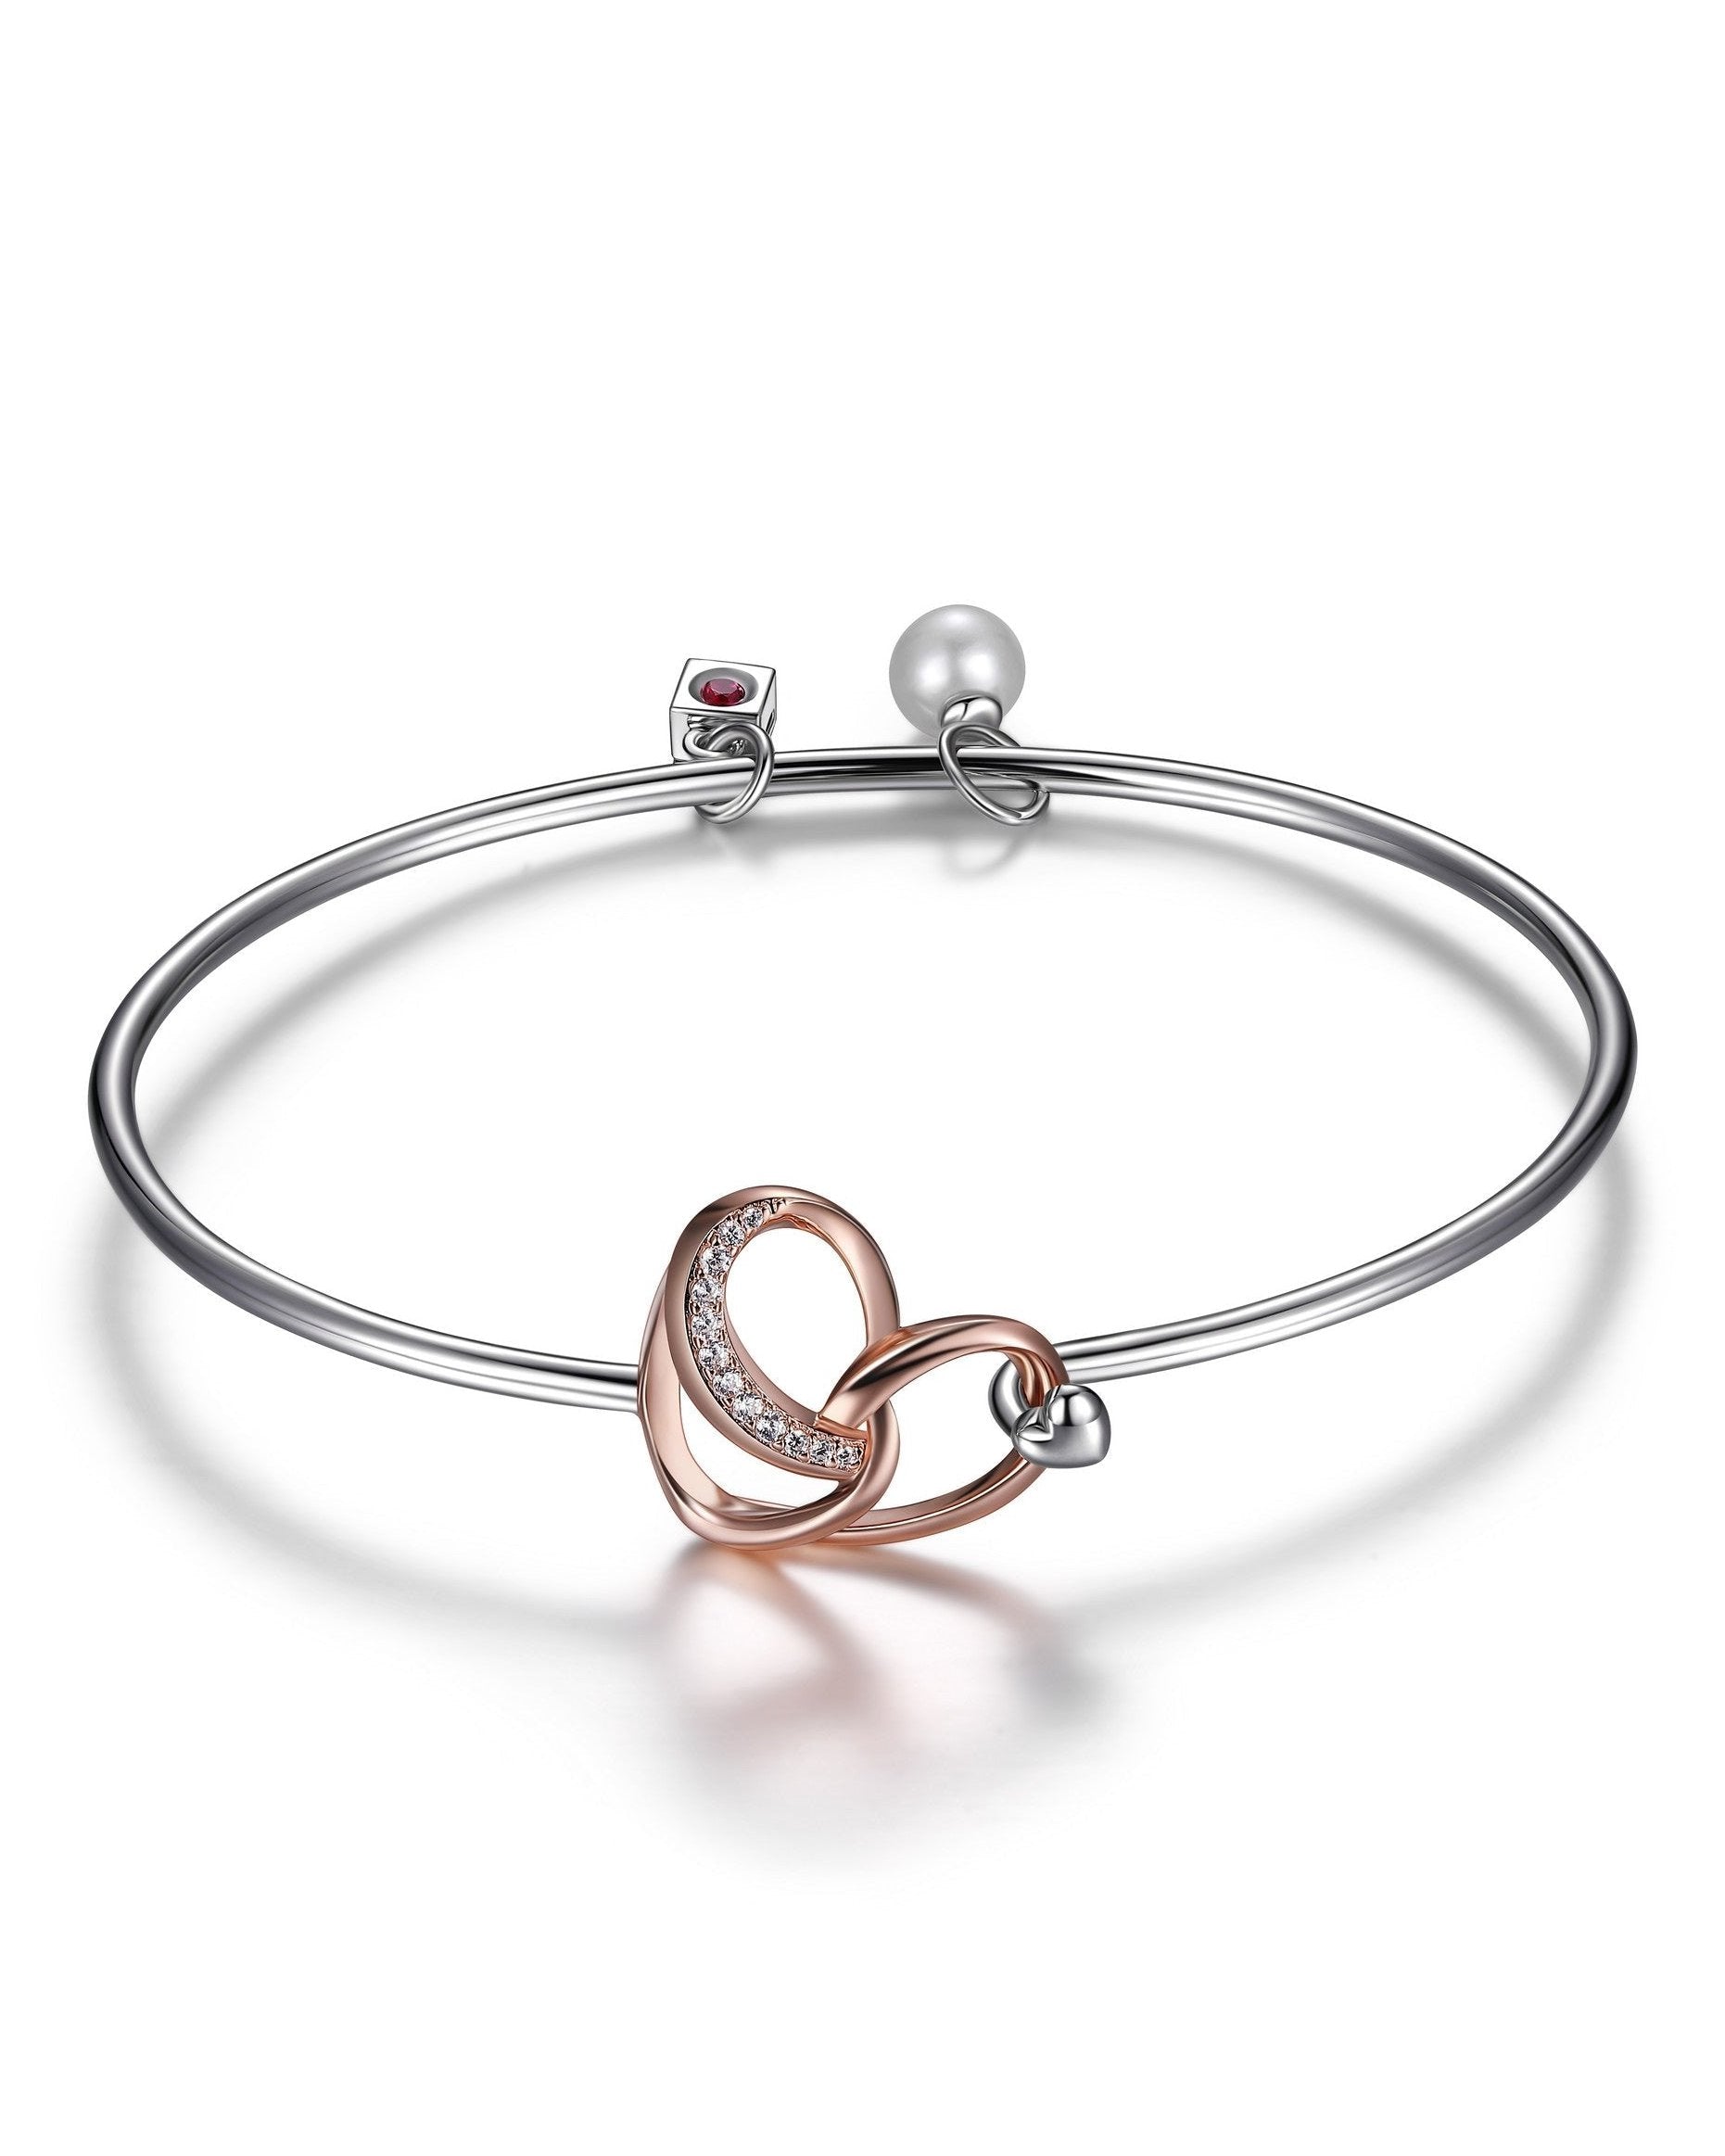 SSRGP Cubic Zirconia Heart Bangle with Genuine Pearl 6.75". Stone size: 5.5-6(mm)